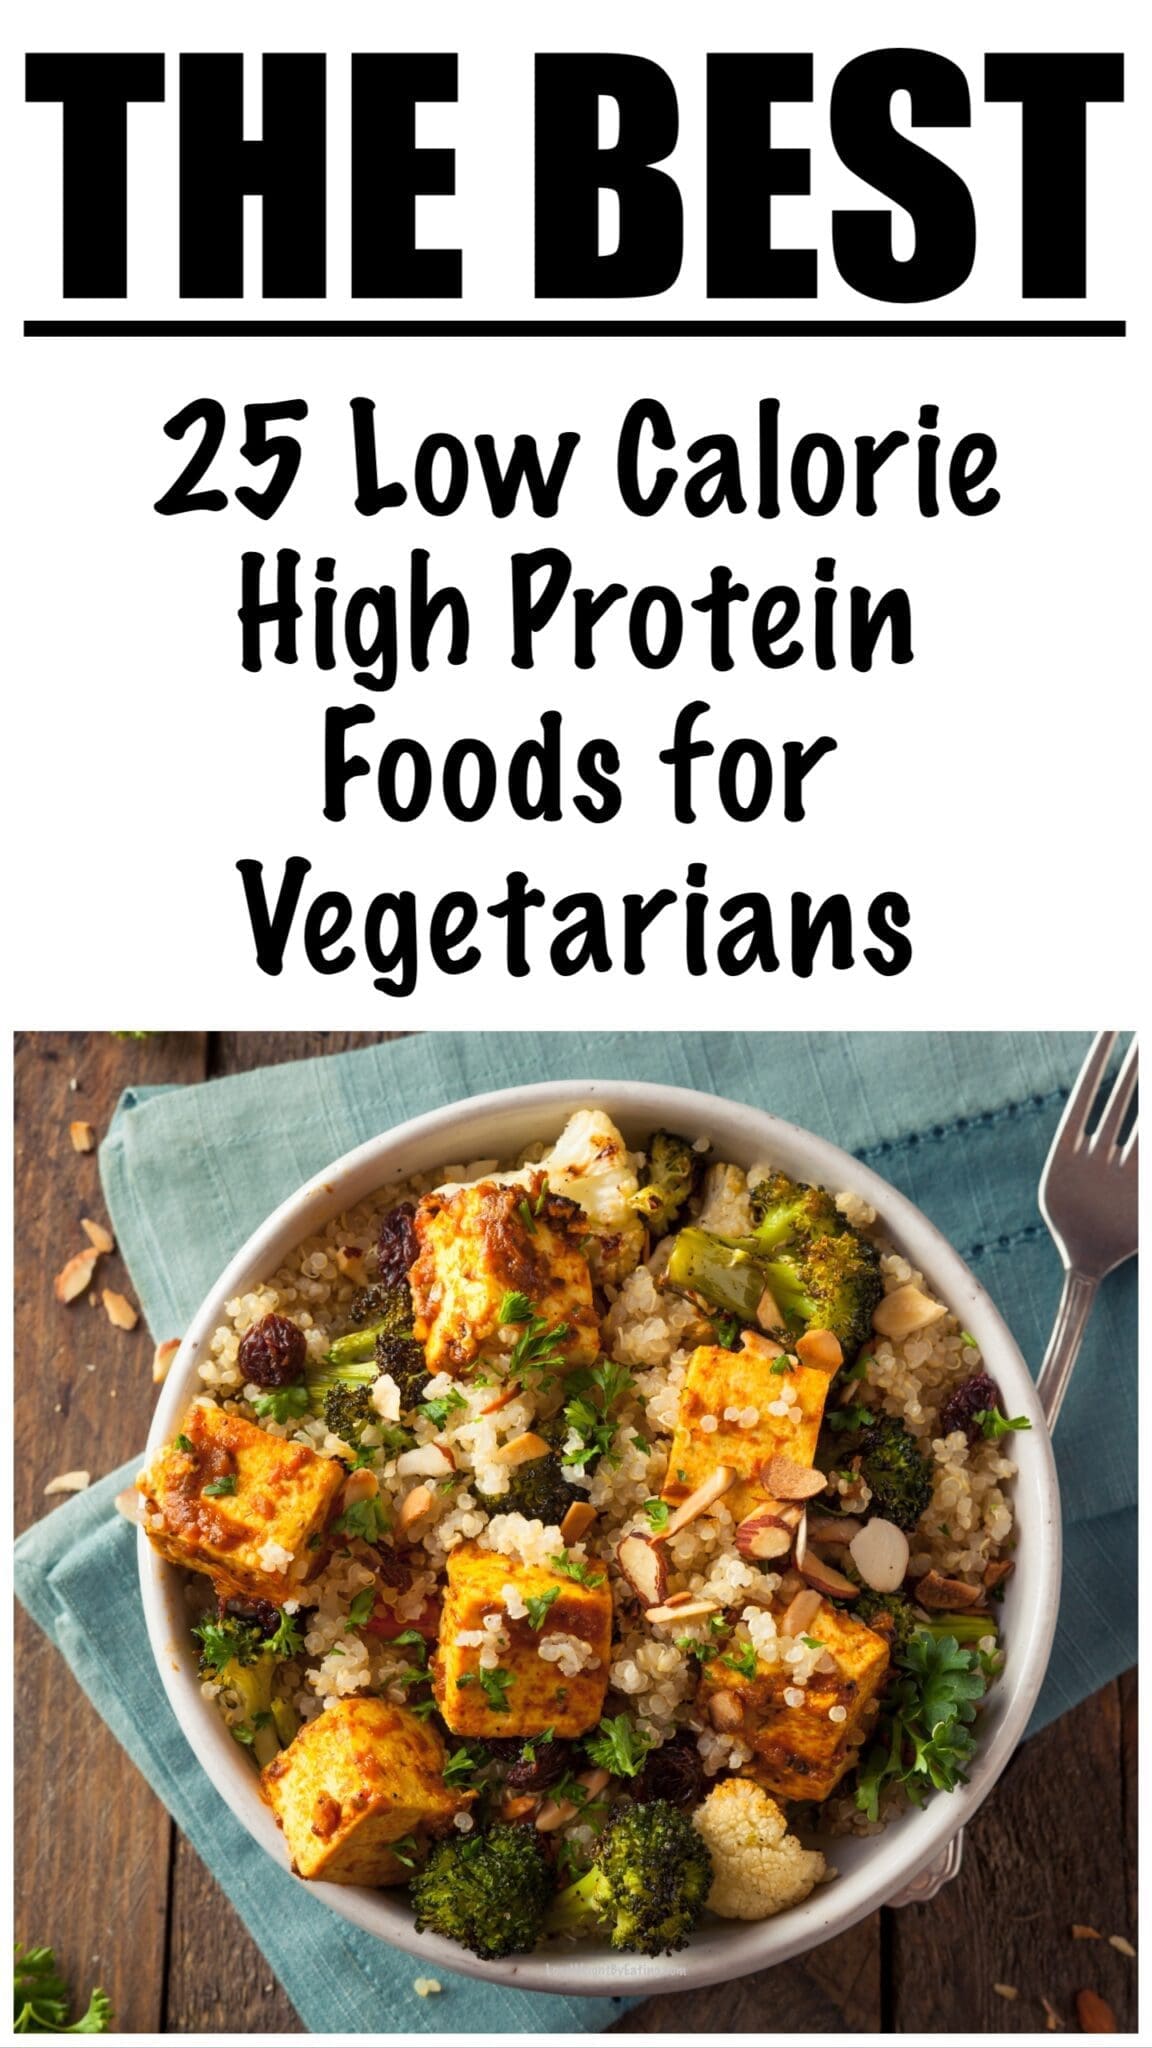 25 Low Calorie High Protein Foods for Vegetarians